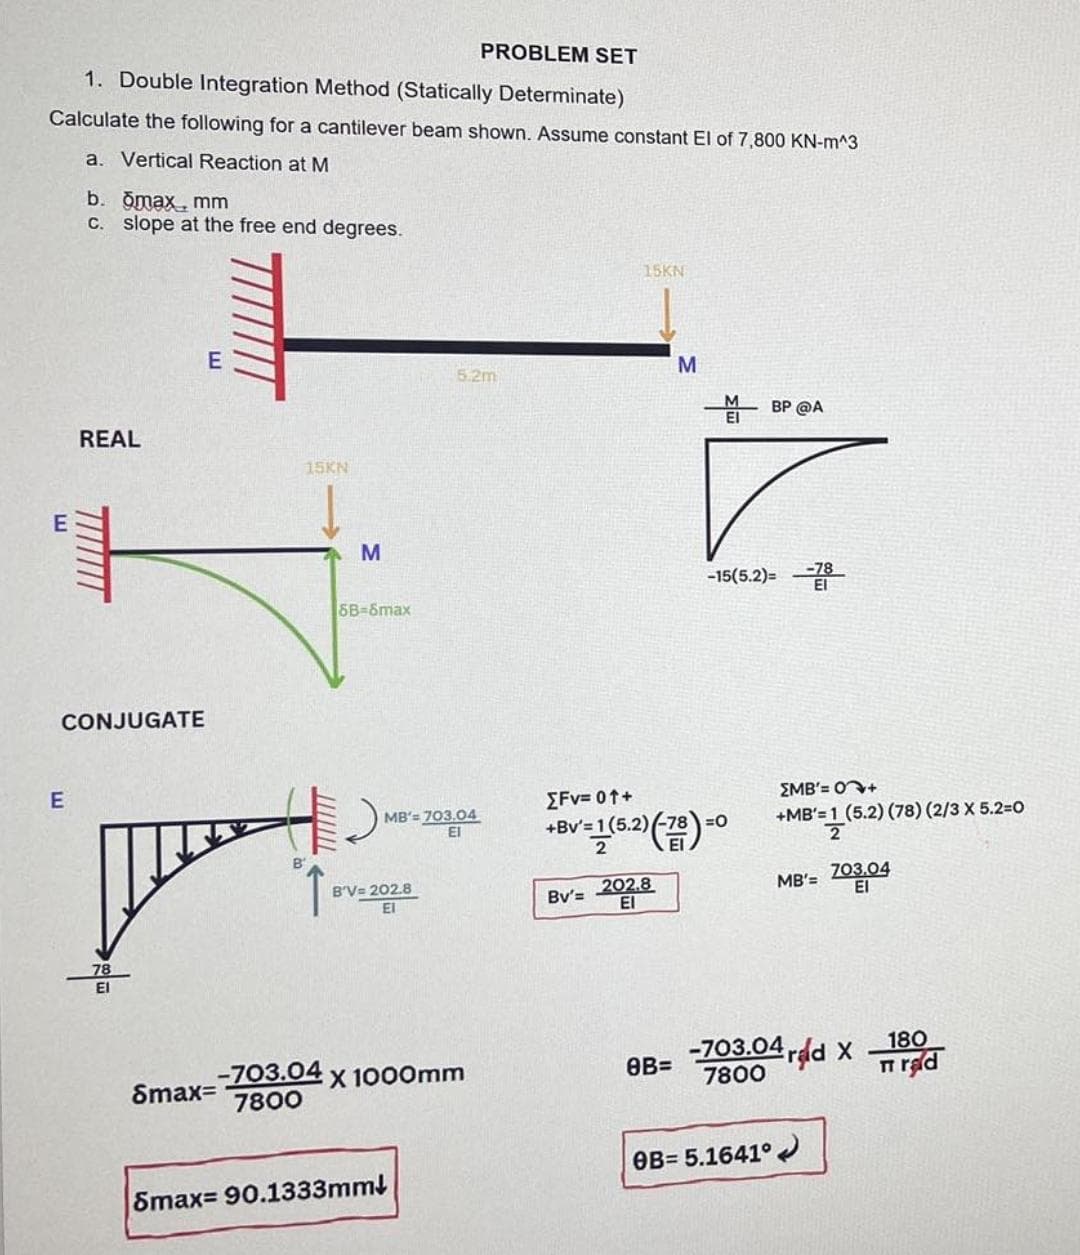 PROBLEM SET
1. Double Integration Method (Statically Determinate)
Calculate the following for a cantilever beam shown. Assume constant El of 7,800 KN-m^3
a. Vertical Reaction at M
W
b. omax, mm
c. slope at the free end degrees.
E
REAL
CONJUGATE
78
El
15KN
M
SB=6max
4
В'
MB'=703.04
El
B'V=202.8
El
5.2m
Smax=-703.04 x 1000mm
7800
Smax= 90.1333mm!
15KN
Bv'= 202.8
El
M
8B=
MBP @A
[Fv=01+
+Bv¹=1(5.2) (-78)=0
-15(5.2)=
EMB'=0+
+MB'=1 (5.2) (78) (2/3 X 5.2=0
2
OB= 5.1641°
MB'= 703,04
-703.04rd X
7800
180
Trad